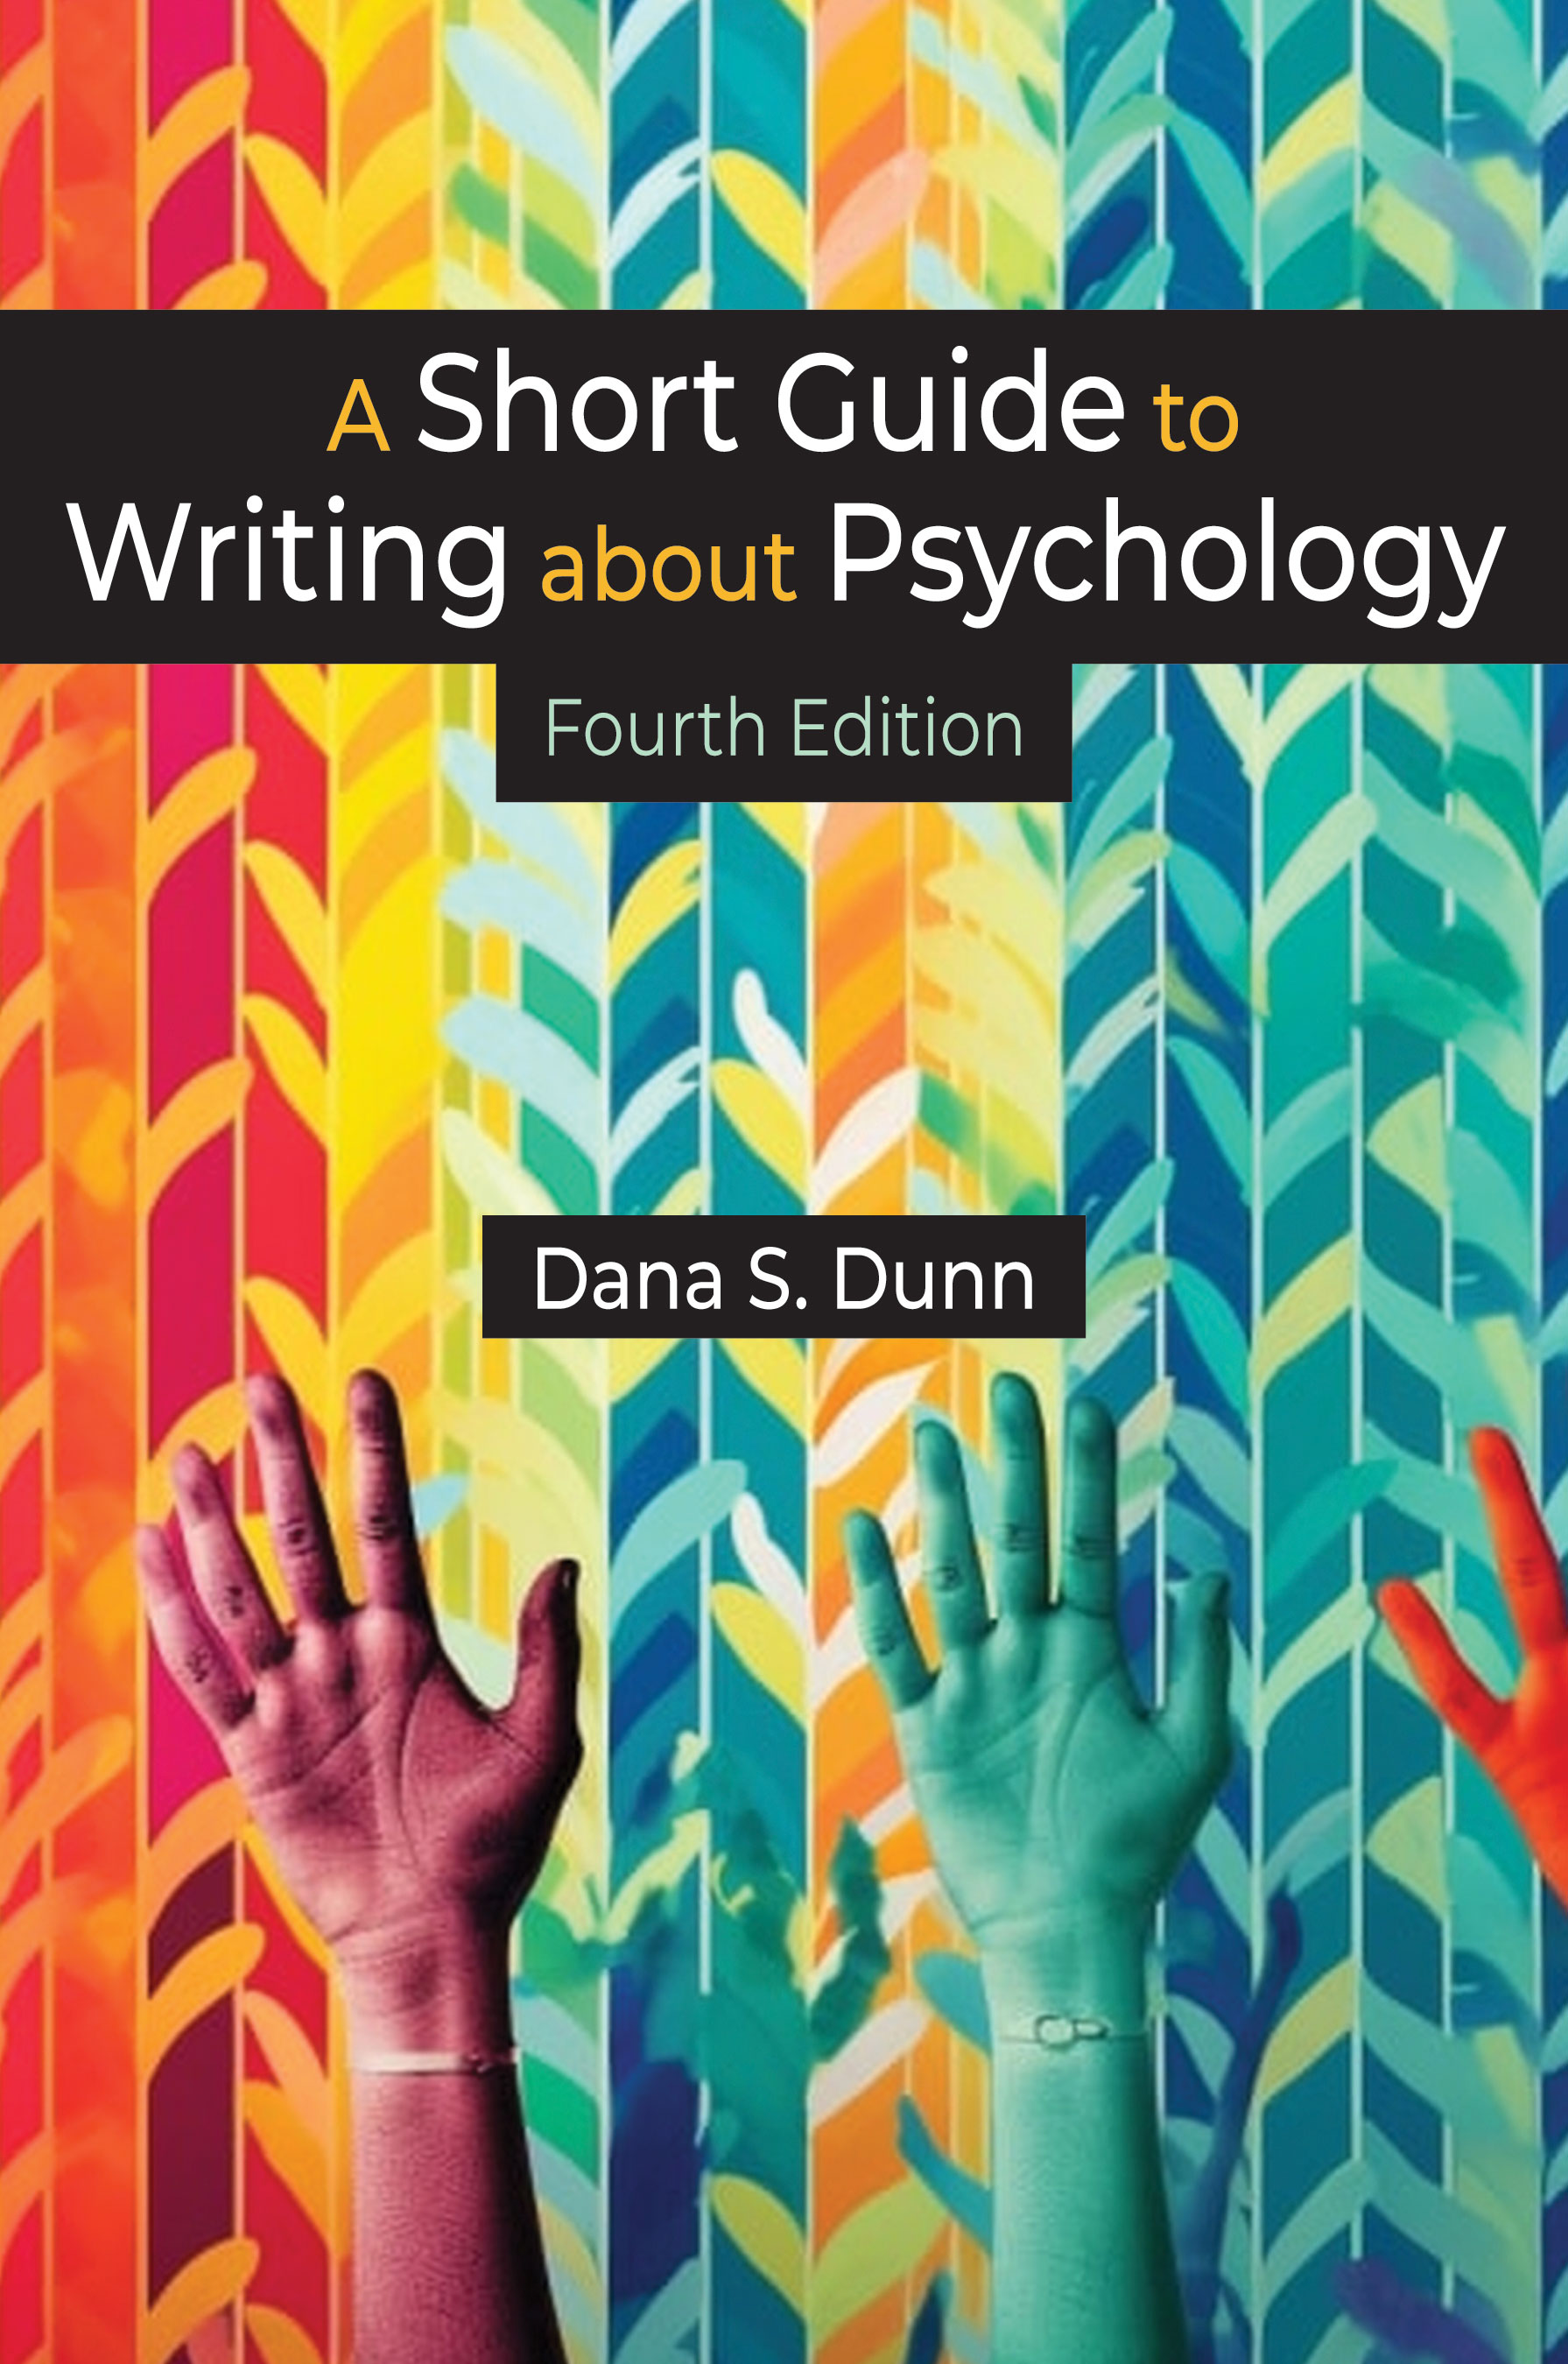 A Short Guide to Writing about Psychology:  by Dana S. Dunn